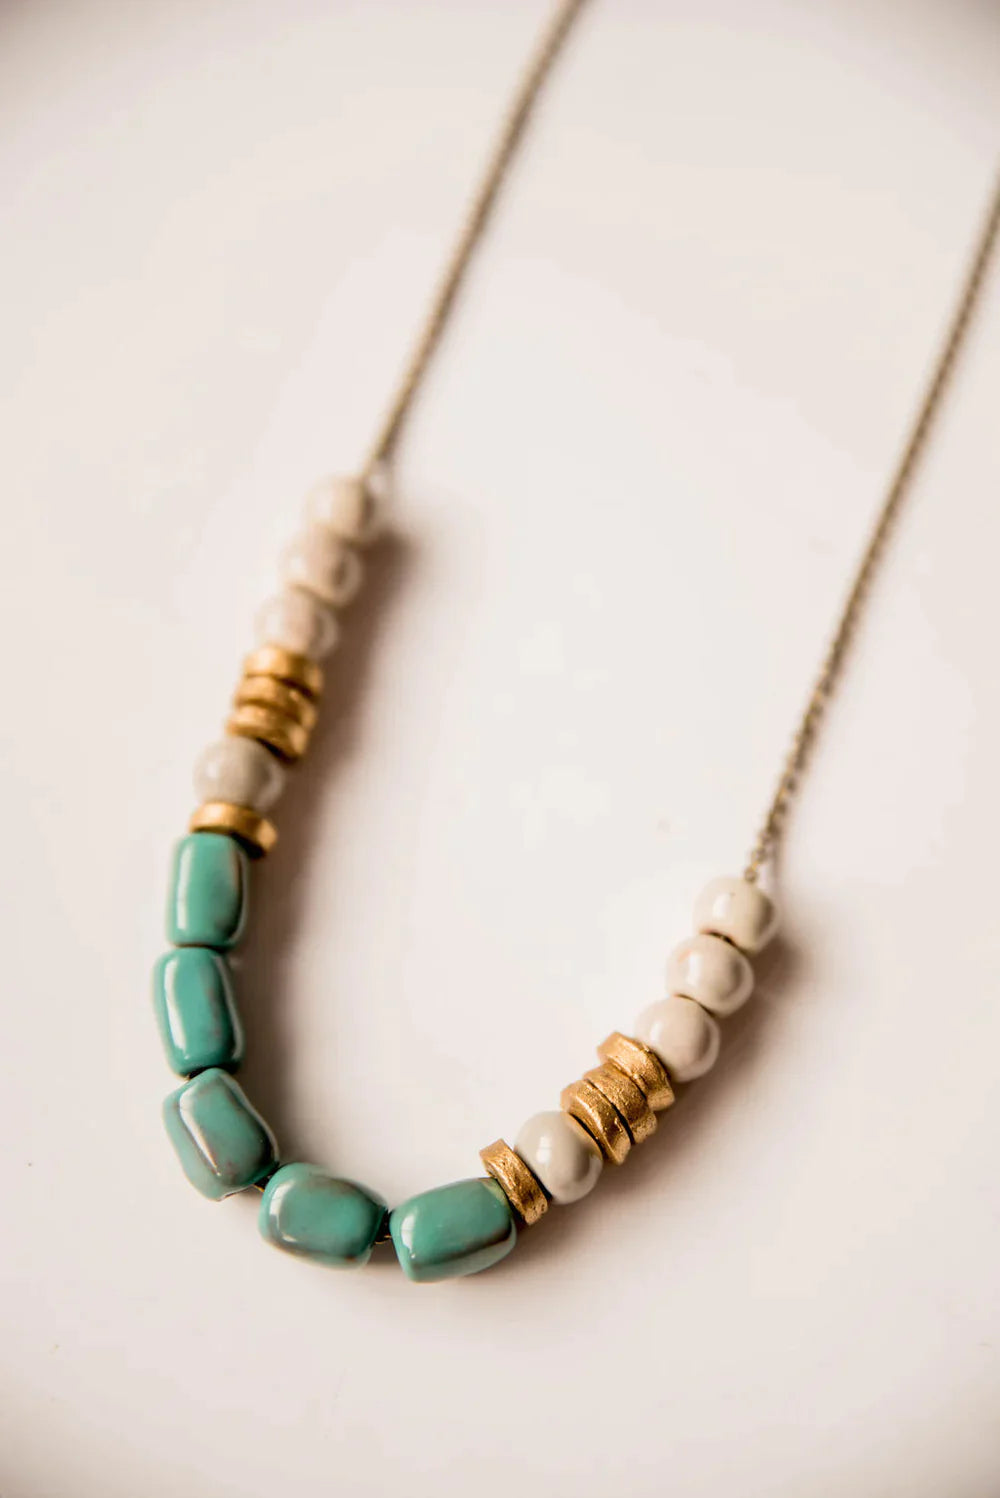 Bel Koz Assorted Beads Clay Necklace - SEAFOAM - Link in description to purchase at Betsey's